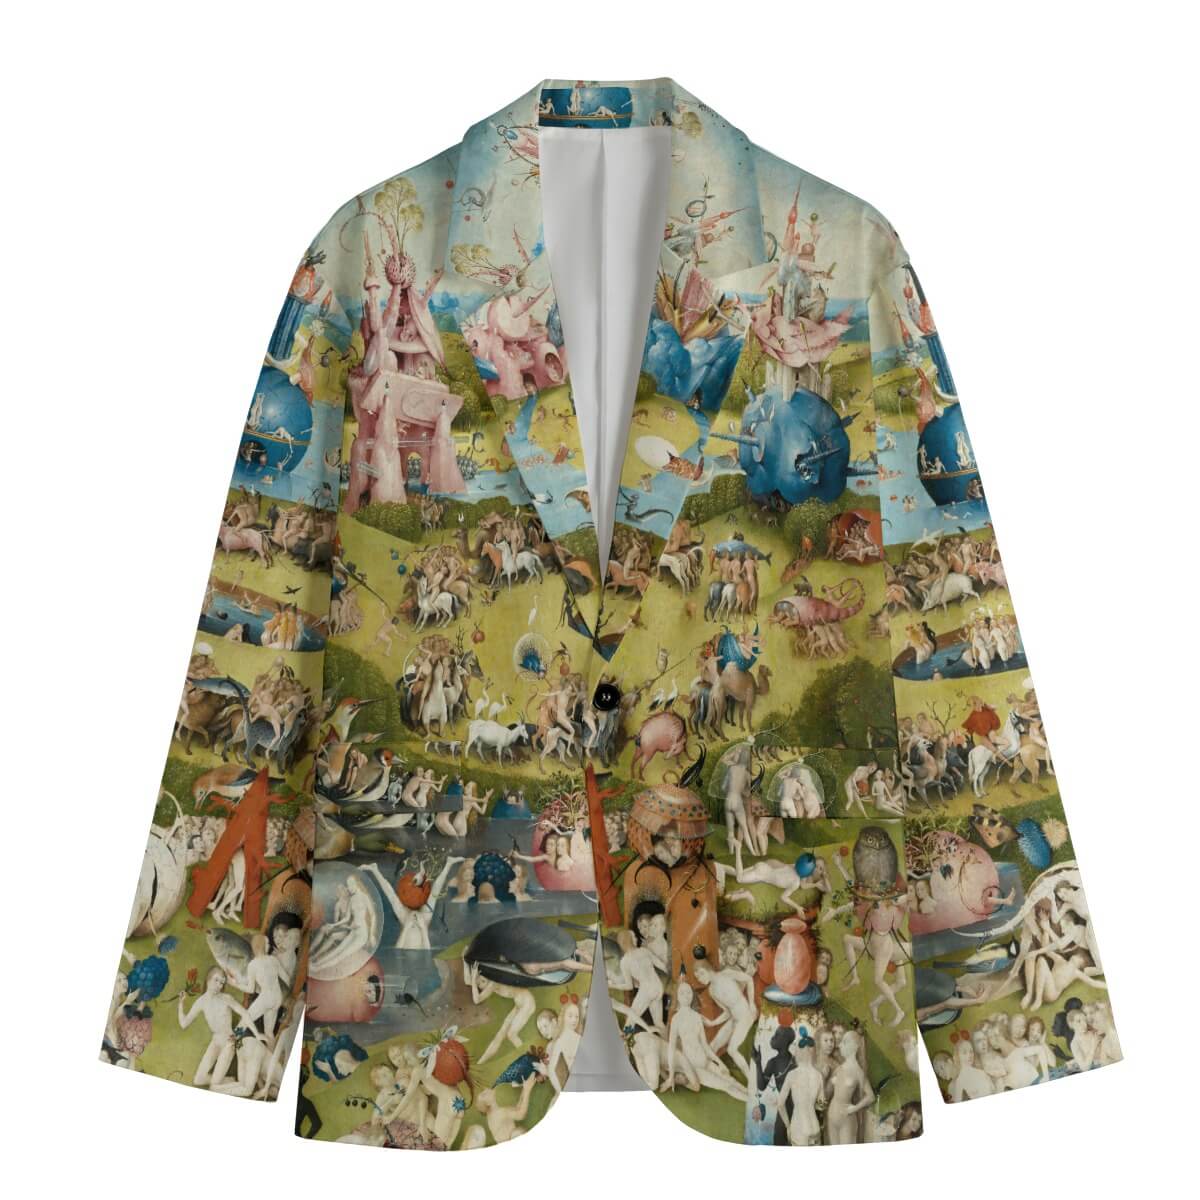 Hieronymus Bosch Earthly Delights Men's Blazer Front View